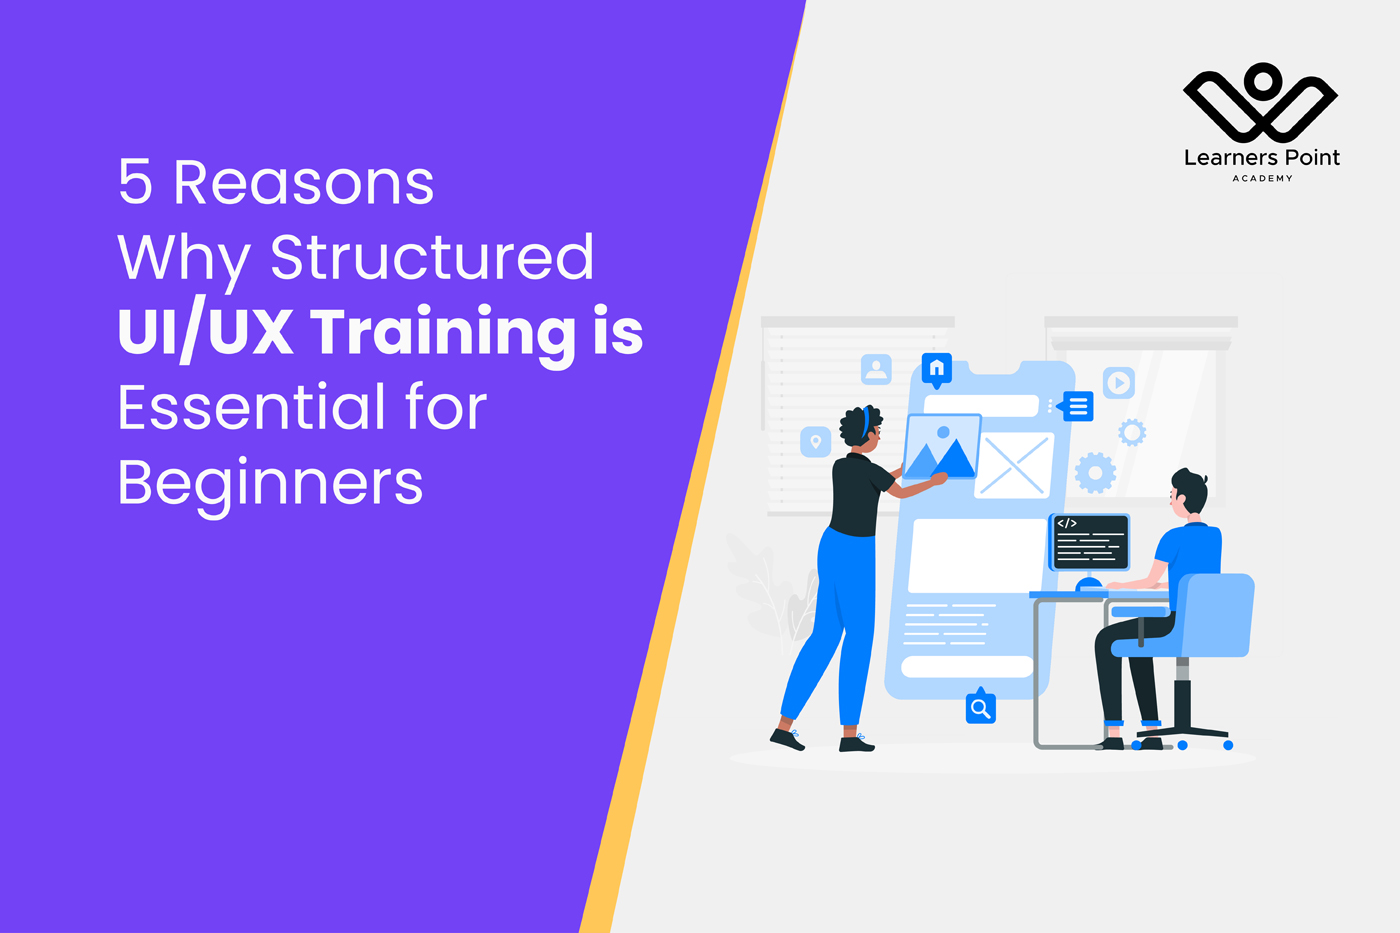 5 Reasons Why Structured UI/UX Training is Essential for Beginners